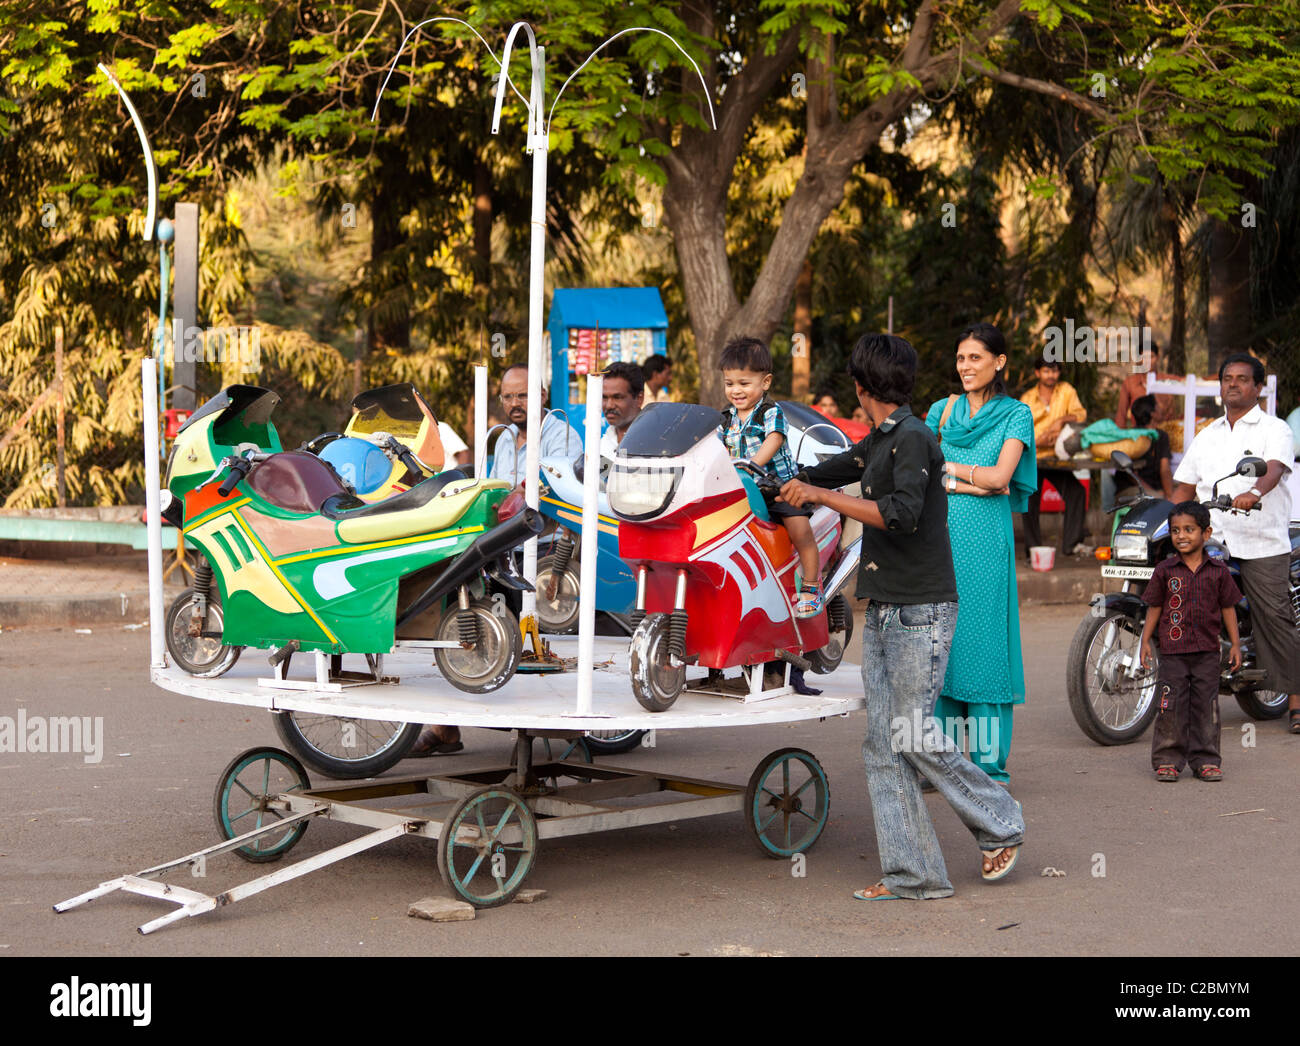 A young Indian boy being pushed on a merry go round in Sholapur Maharashtra India Stock Photo